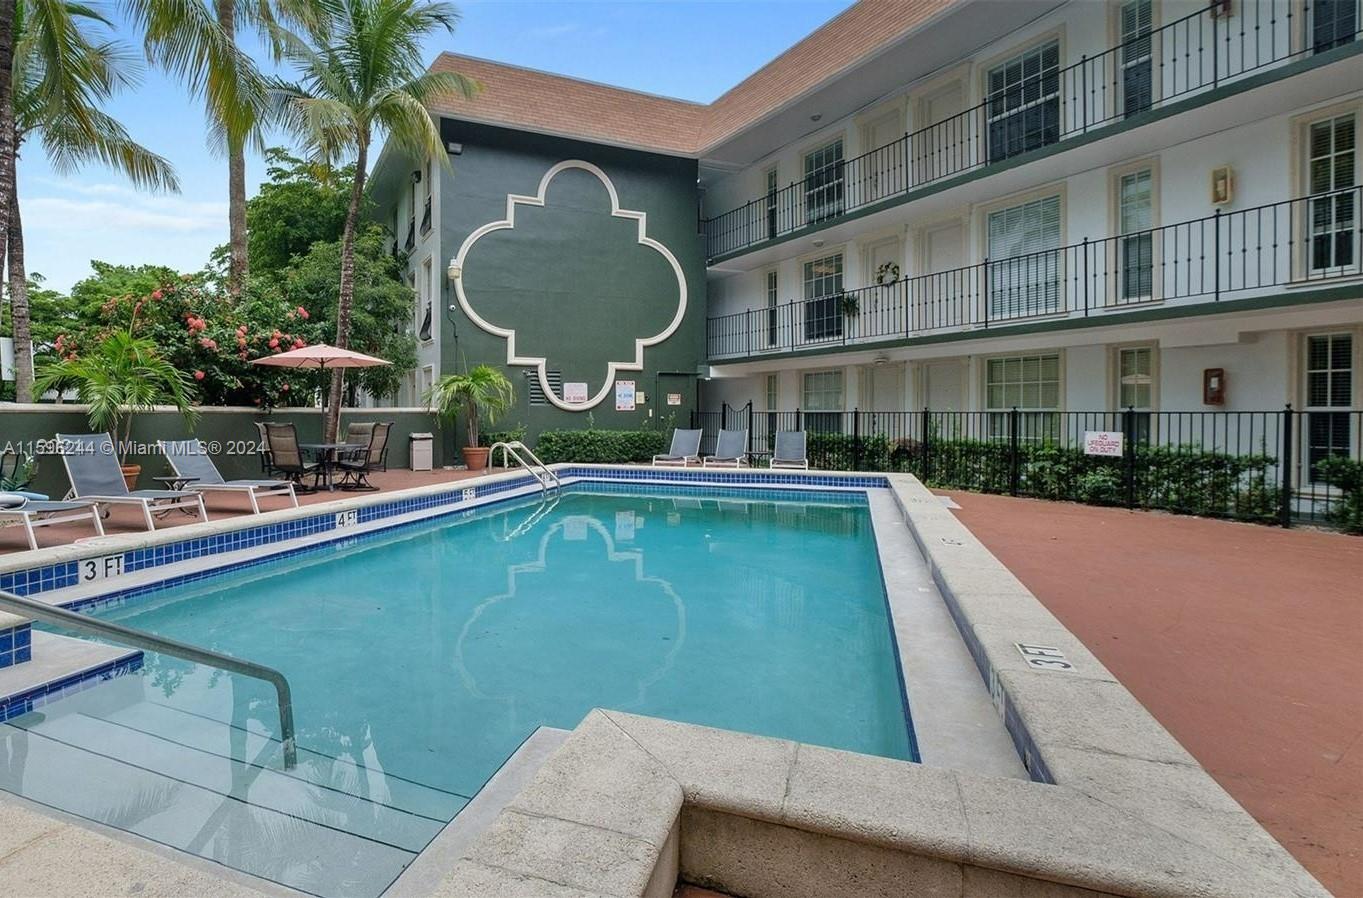 RARE PRIME Highly Desirable COCONUT GROVE 1br/1ba! GREAT INVESTMENT on this Condo with and amazing location in the heart of Coconut Grove. Currently rented for $1725 through end of October.  Located at the serene, gated, tree-lined community of Virginia Pointe features pool, bbq area, laundry, bike rack & assigned parking. Walkability! You are minutes away from CocoWalk, shops, restaurants, marina, Bayfront parks providing endless opportunities for leisure & recreation. Central to Brickell, Coral Gables, South Miami & University of Miami. Call listing agent for details.